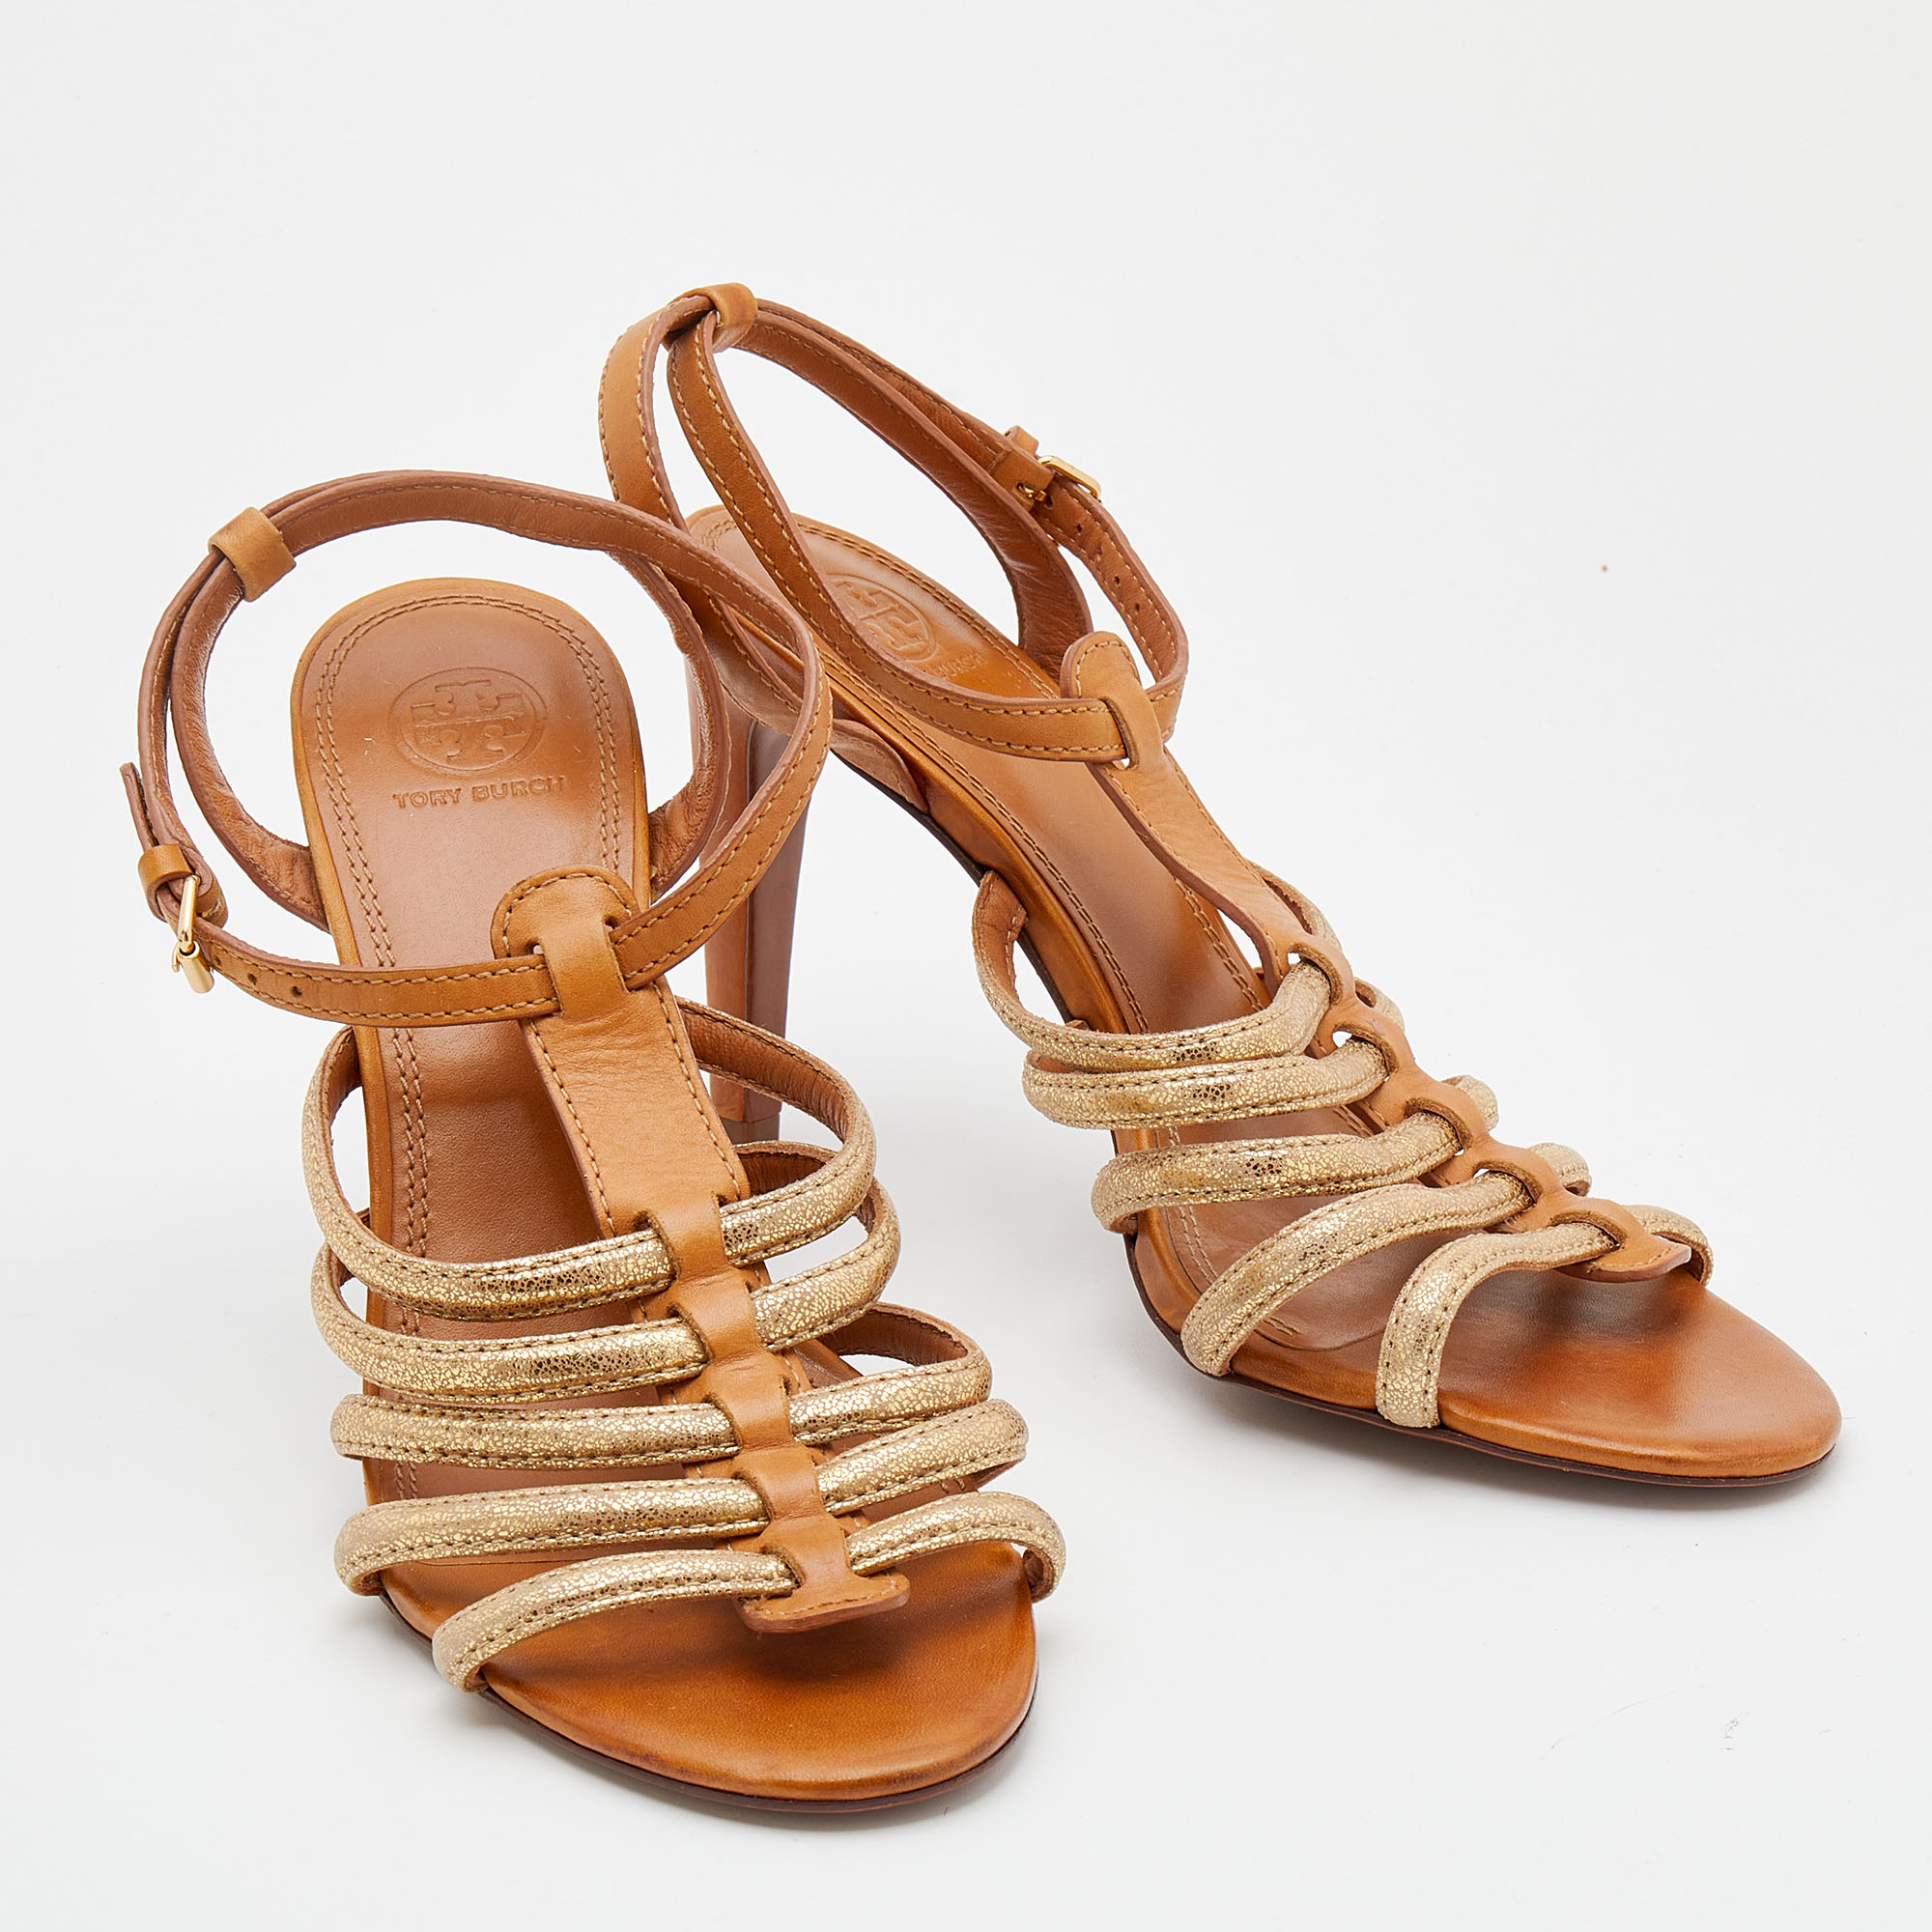 Tory Burch Brown Leather Charlene Gladiator Sandals Size 41